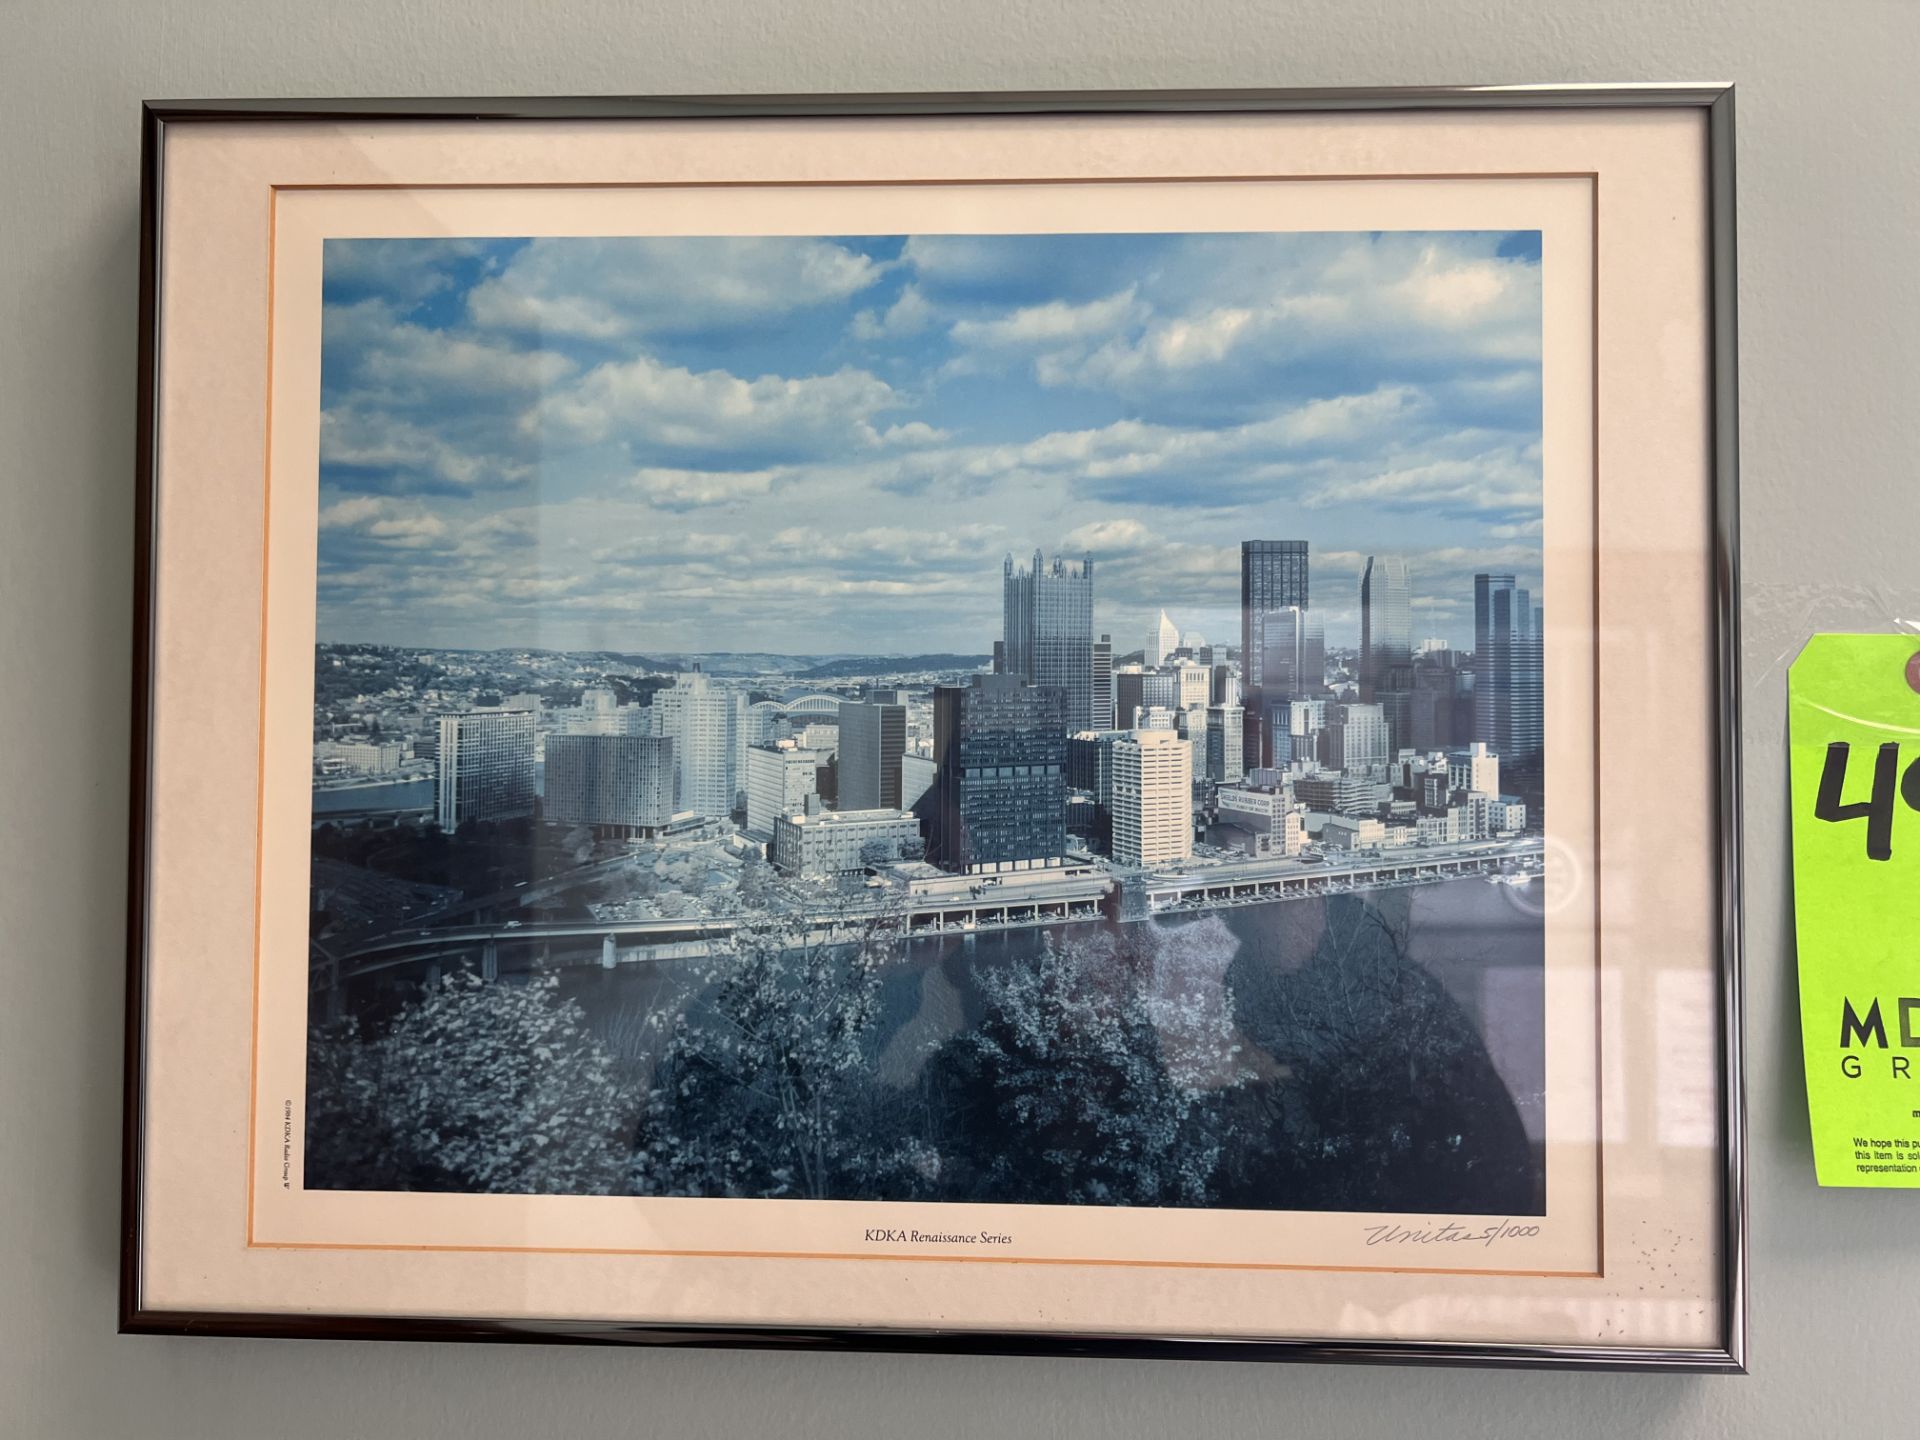 FRAMED PHOTO OF DOWNTOWN PITTSBURGH FROM KDKA RENAISSANCE SERIES - Image 3 of 3